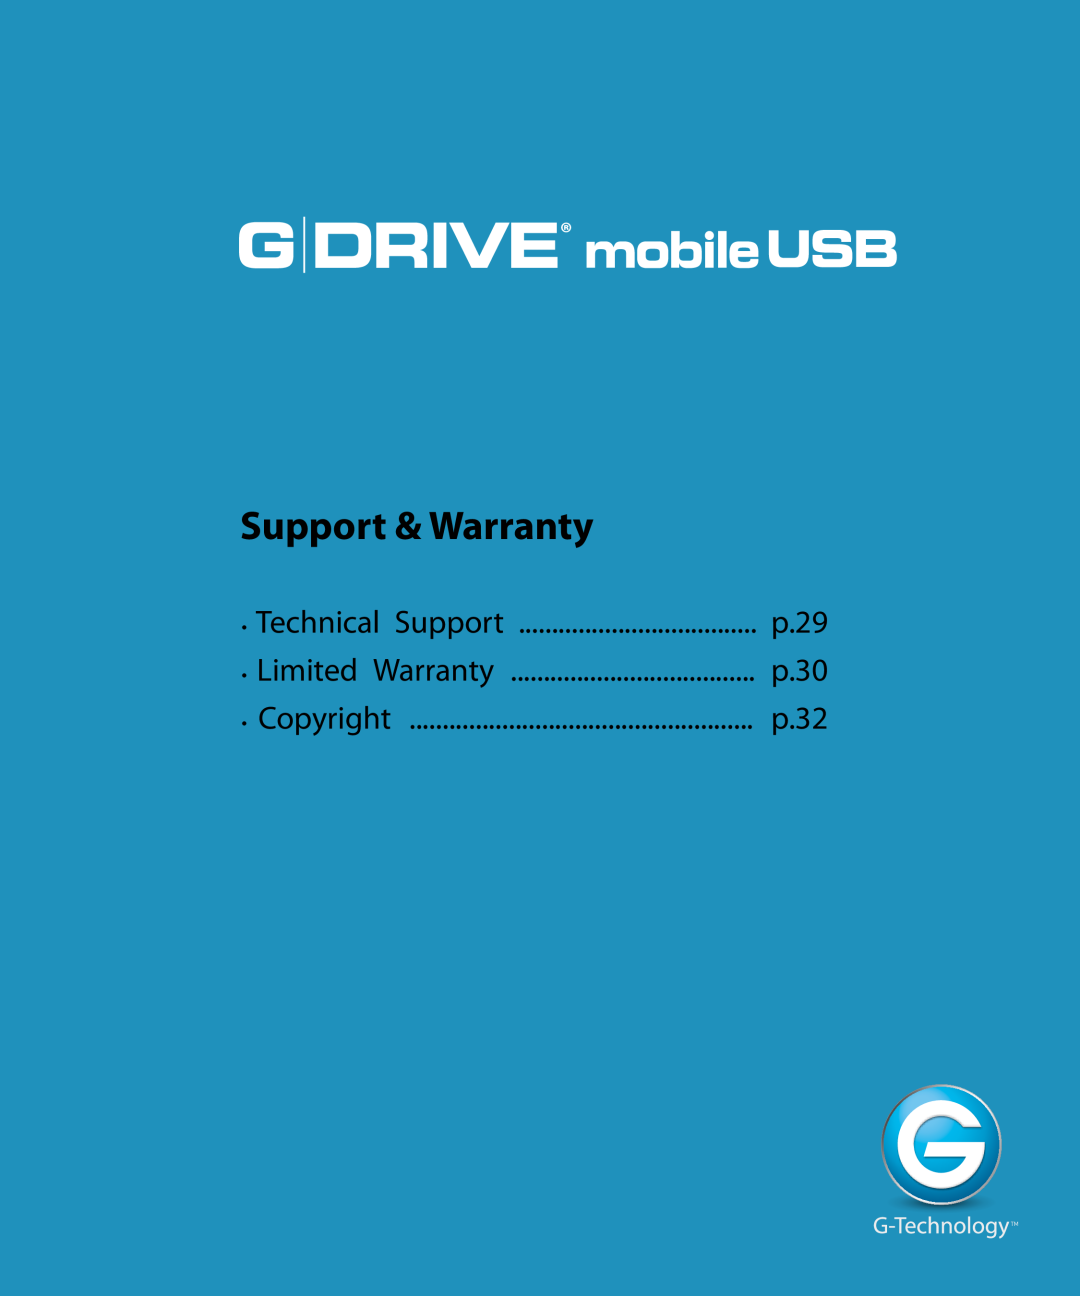 G-Technology GC760AV Support & Warranty, Technical Support, p.29, Limited Warranty, p.30, Copyright, p.32, G Drive Usb 